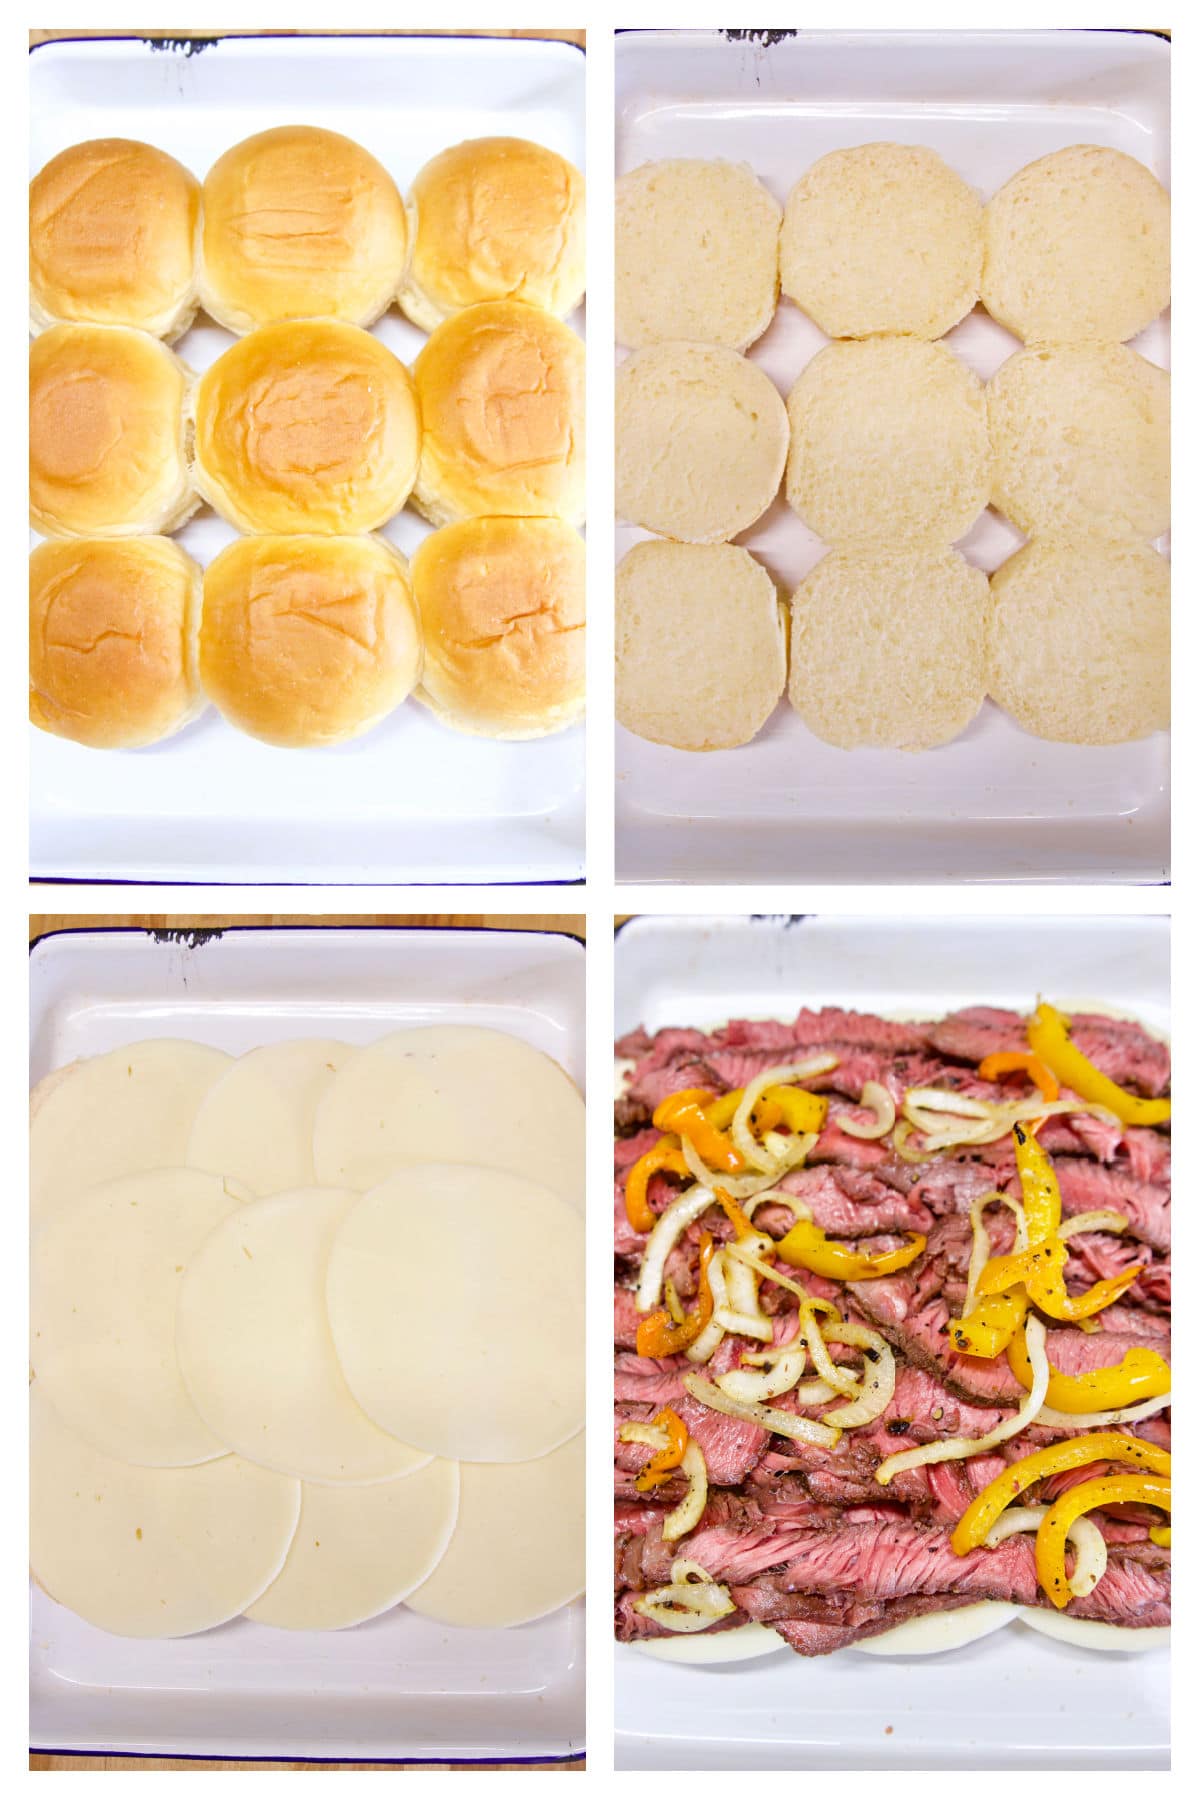 Collage making sliders with steak, cheese, peppers and onions.